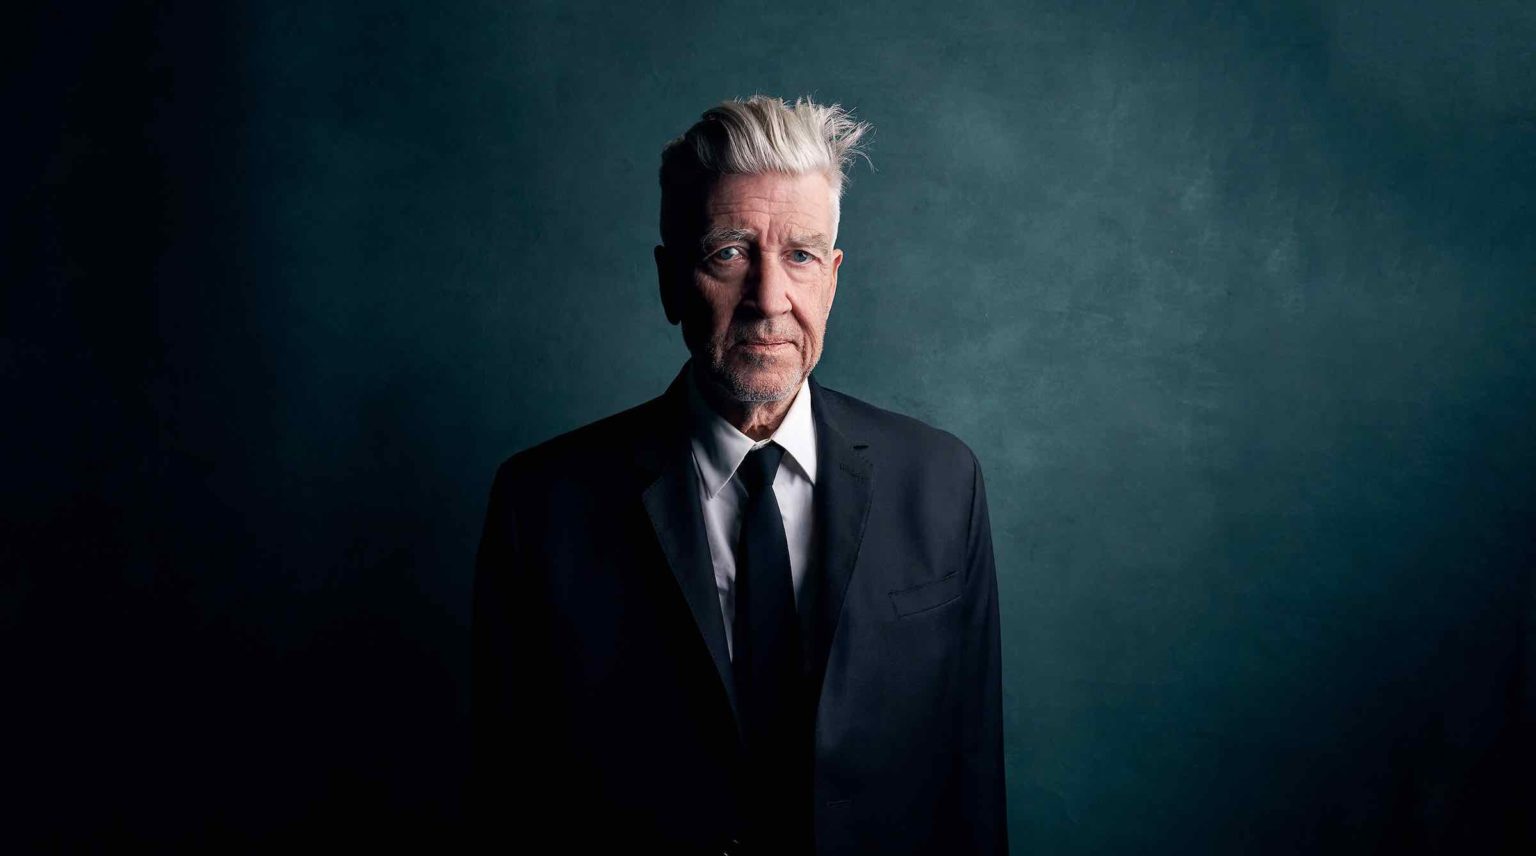 We’re diving right into a list of David Lynch’s most psychologically confounding movies to obsess over. Here's the best David Lynch movies.